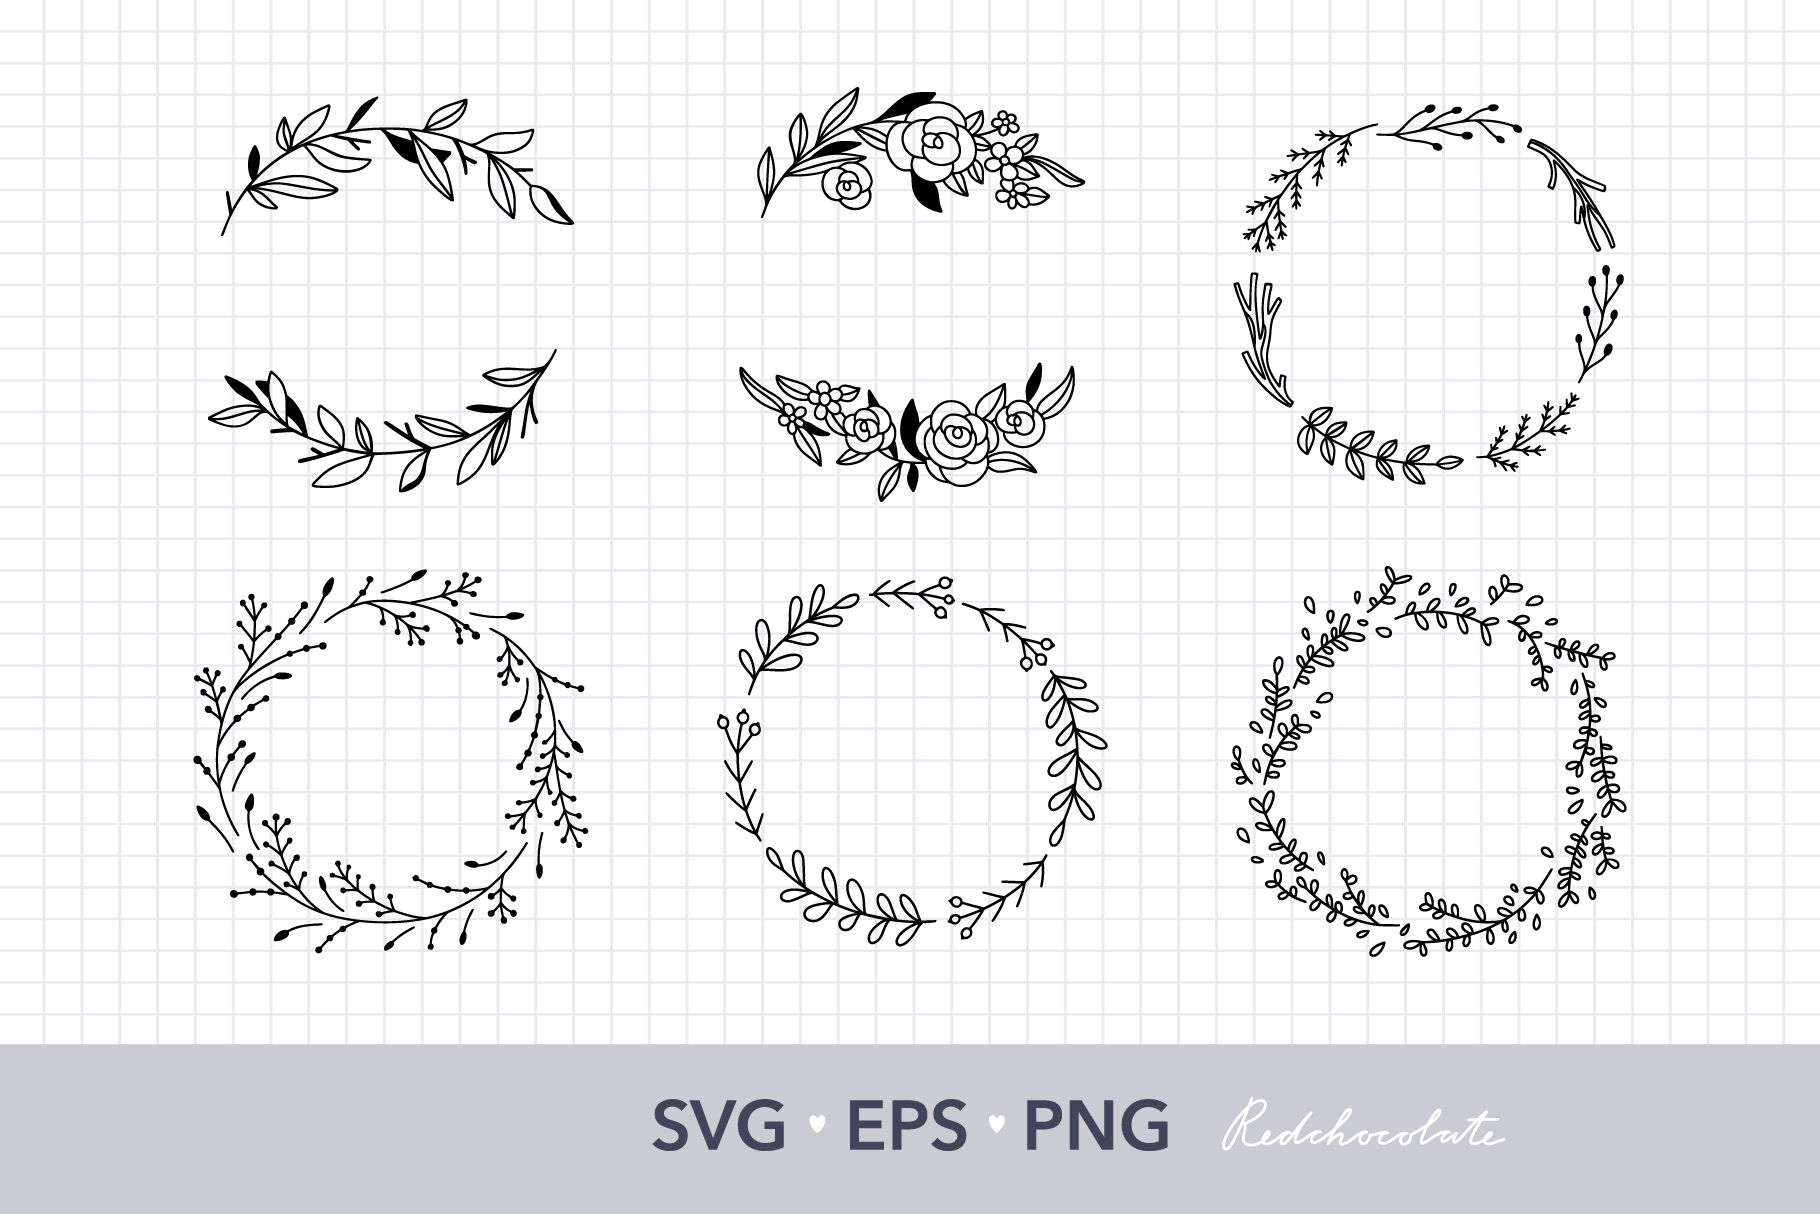 Floral Wreath Svg Clipart Set Hand Drawn Wreath Clipart Collection By Redchocolate Illustration Thehungryjpeg Com